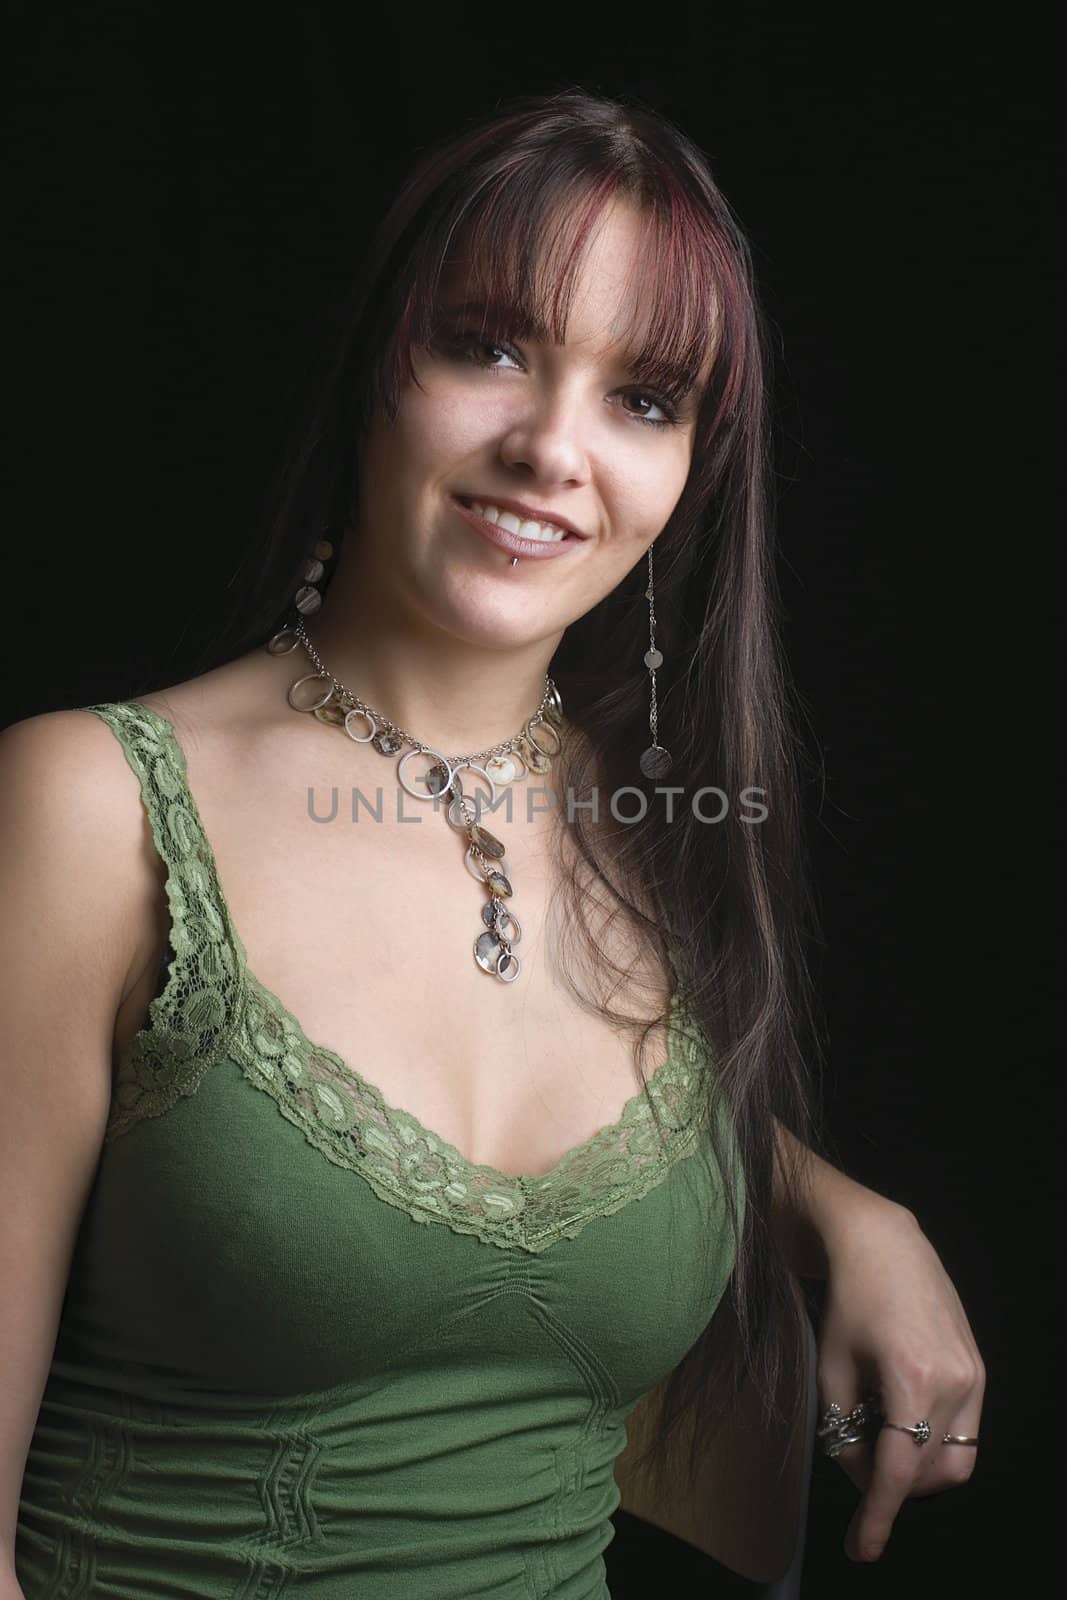 Portrait of fashion model in relaxe position with green tank top, sitting on a chair